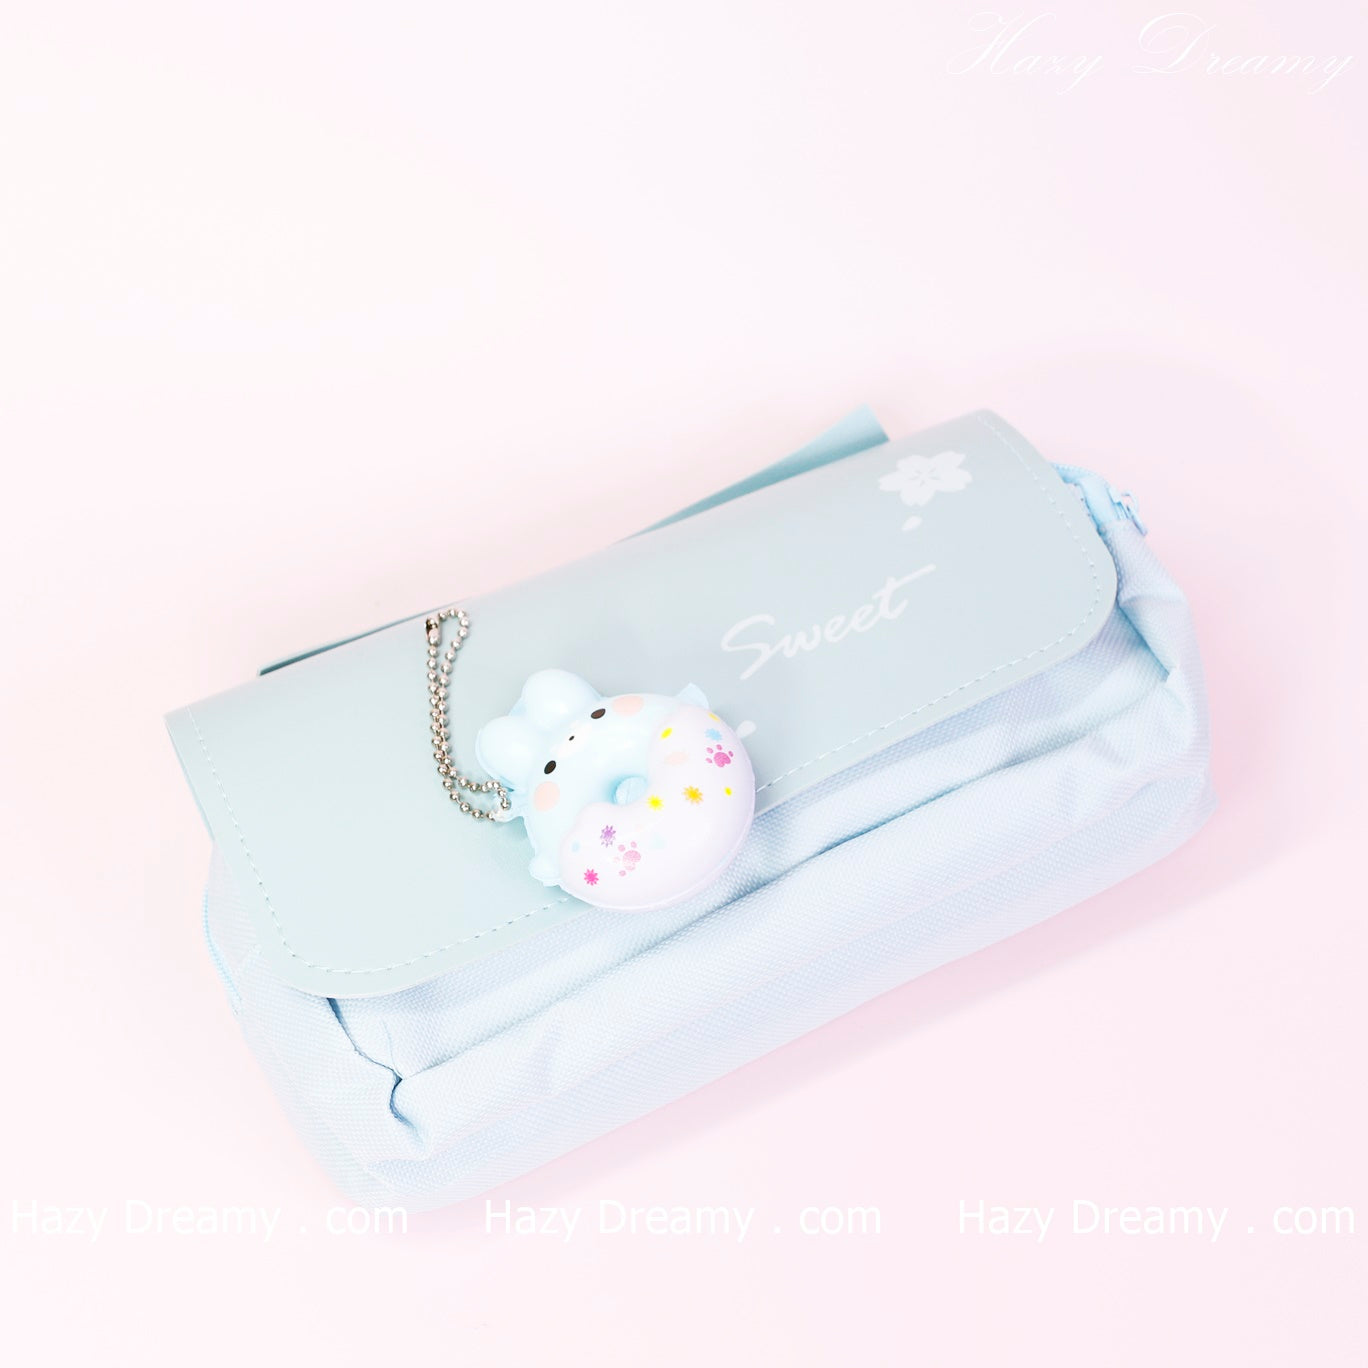 Sweet Bunny Pen & Pencil Case - Adorable Stationery Organizer in Pastel Blue